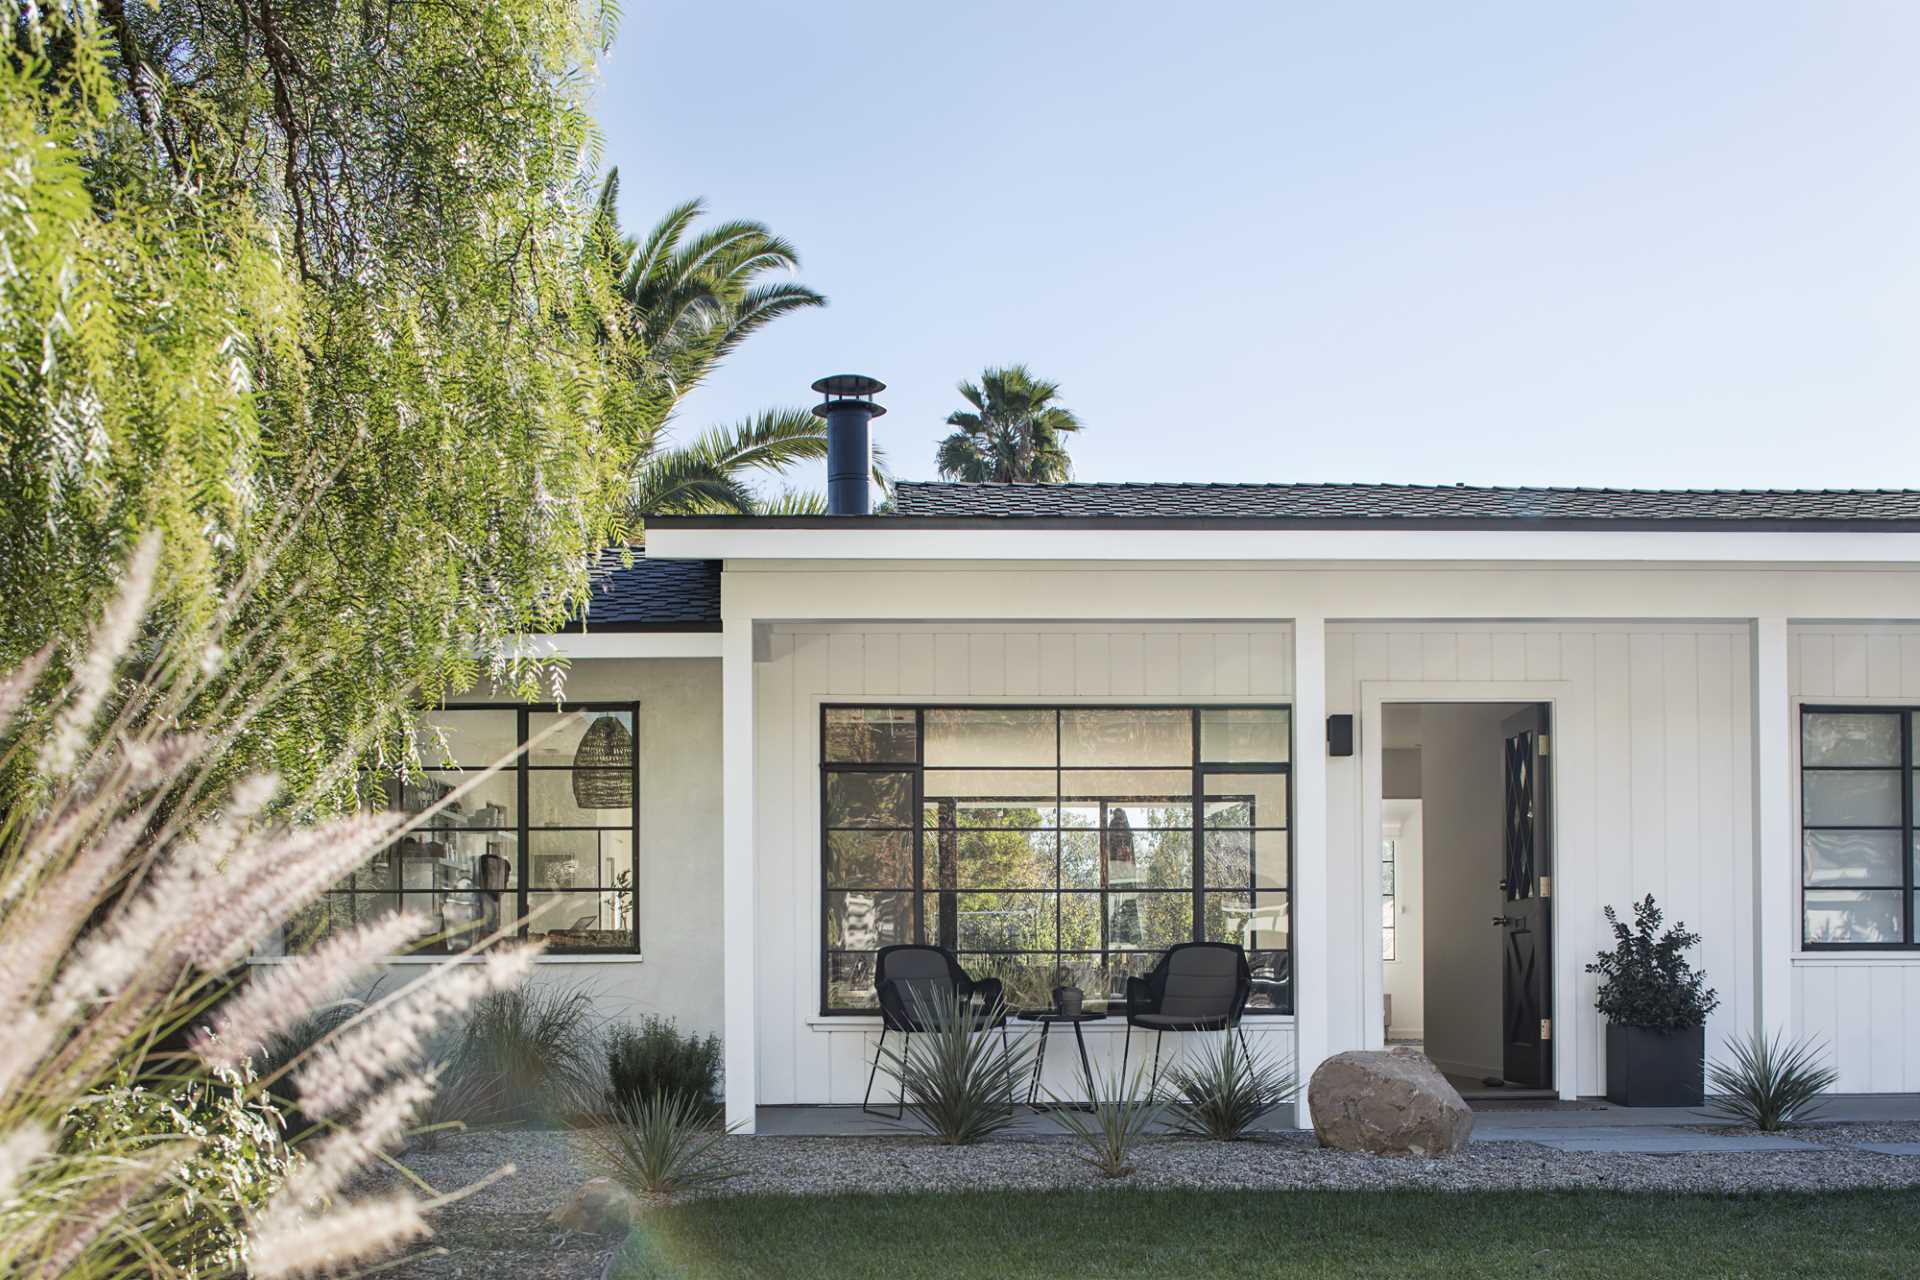 A renovated ranch home with a black and white colour palette.